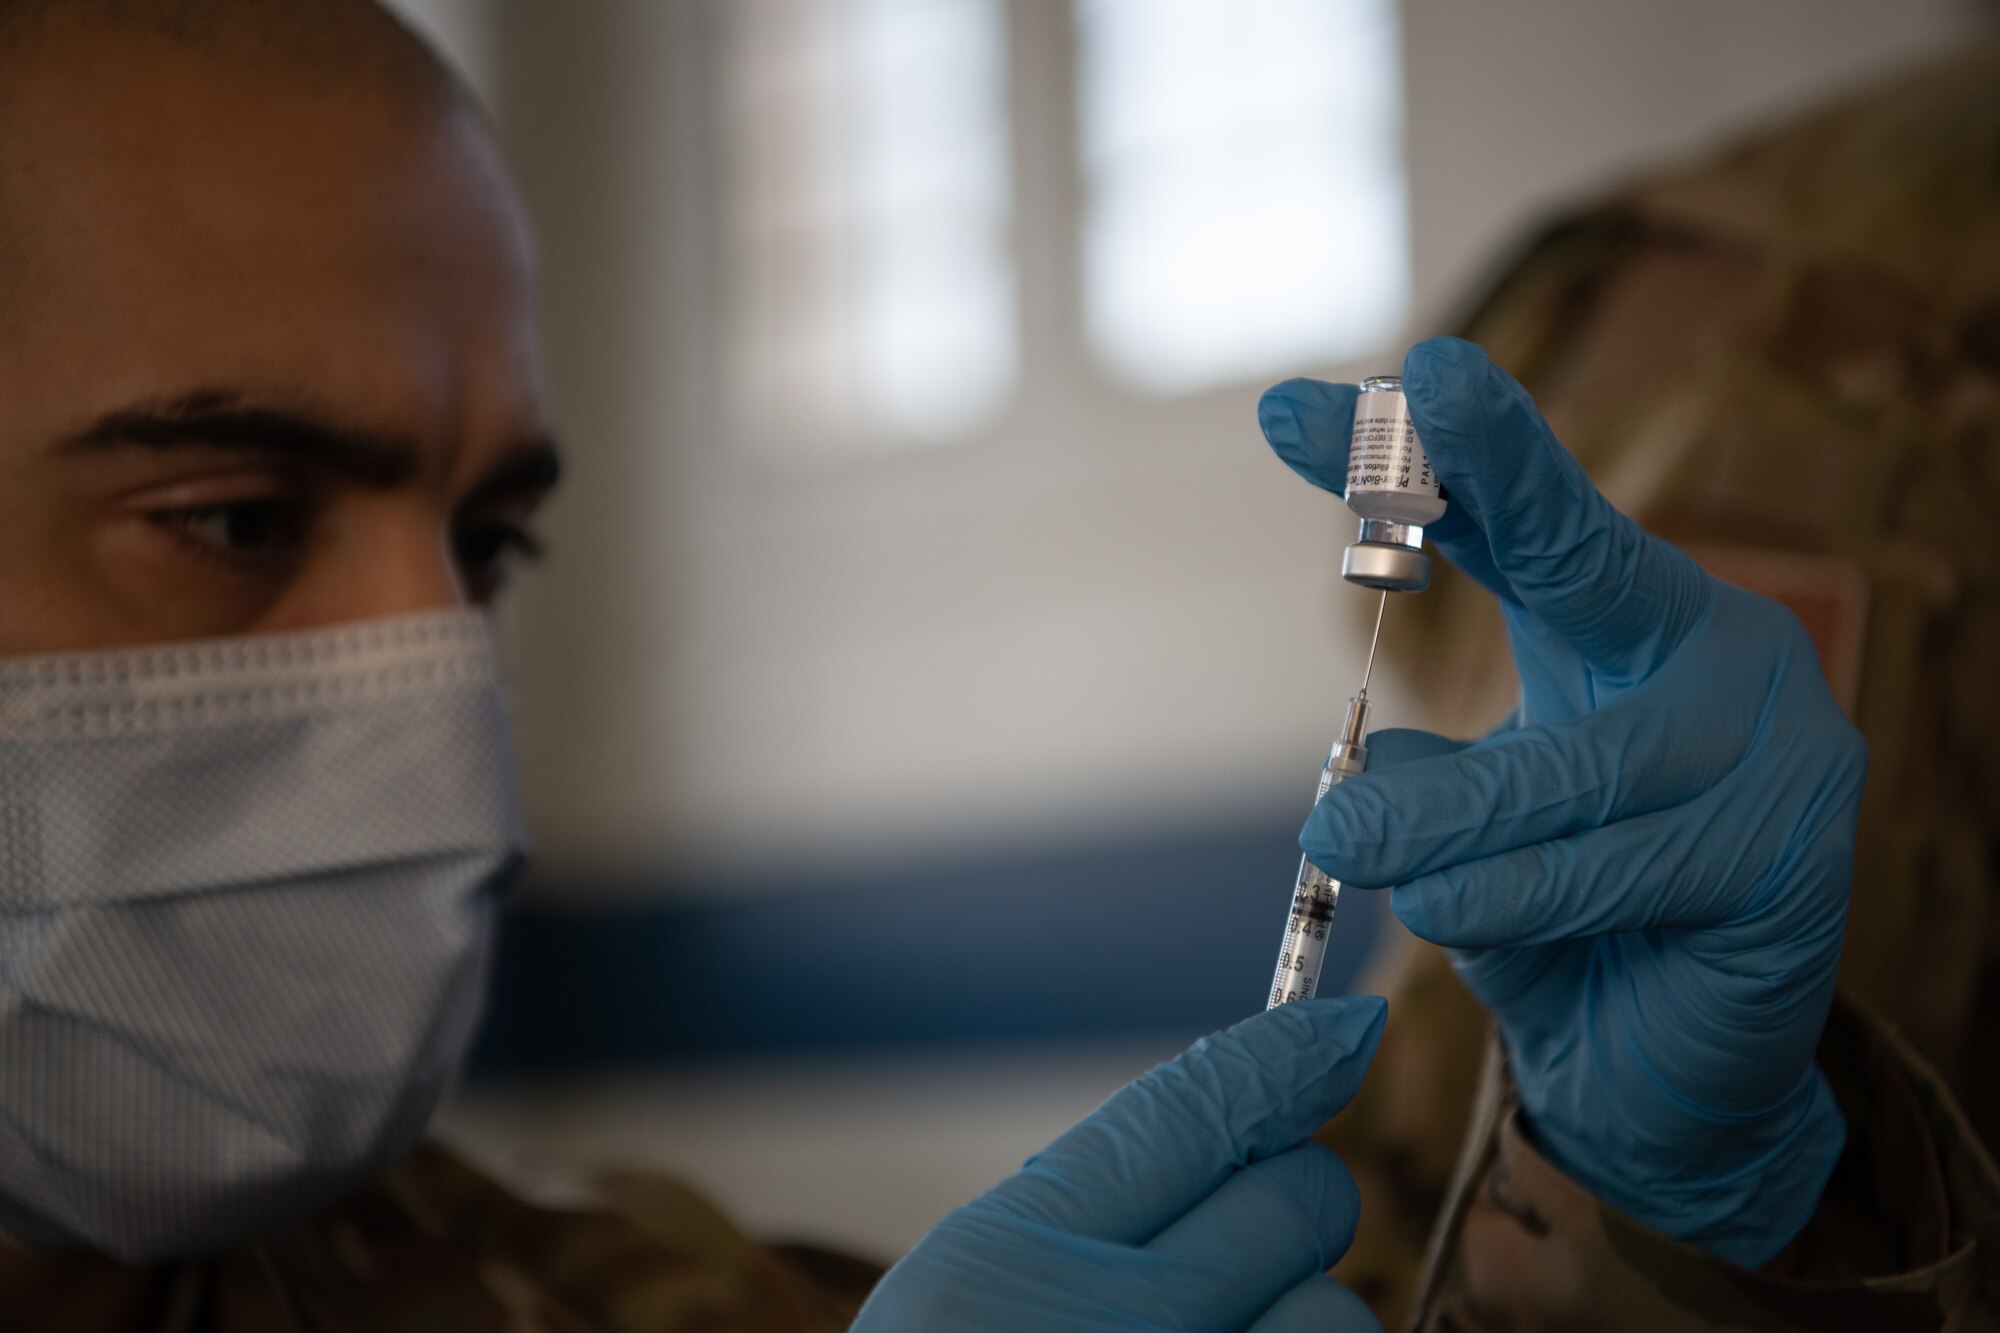 Staff Sgt. Jason Medina, 42nd Medical Group immunizations noncommissioned officer in charge, prepares the COVID-19 vaccine for administration Jan. 16, 2020, at the off-site clinic in the Honor Guard hangar on Maxwell Air Force Base, Alabama. The 42nd Medical Group aims to administer the available doses of the vaccine in a five-day time frame.